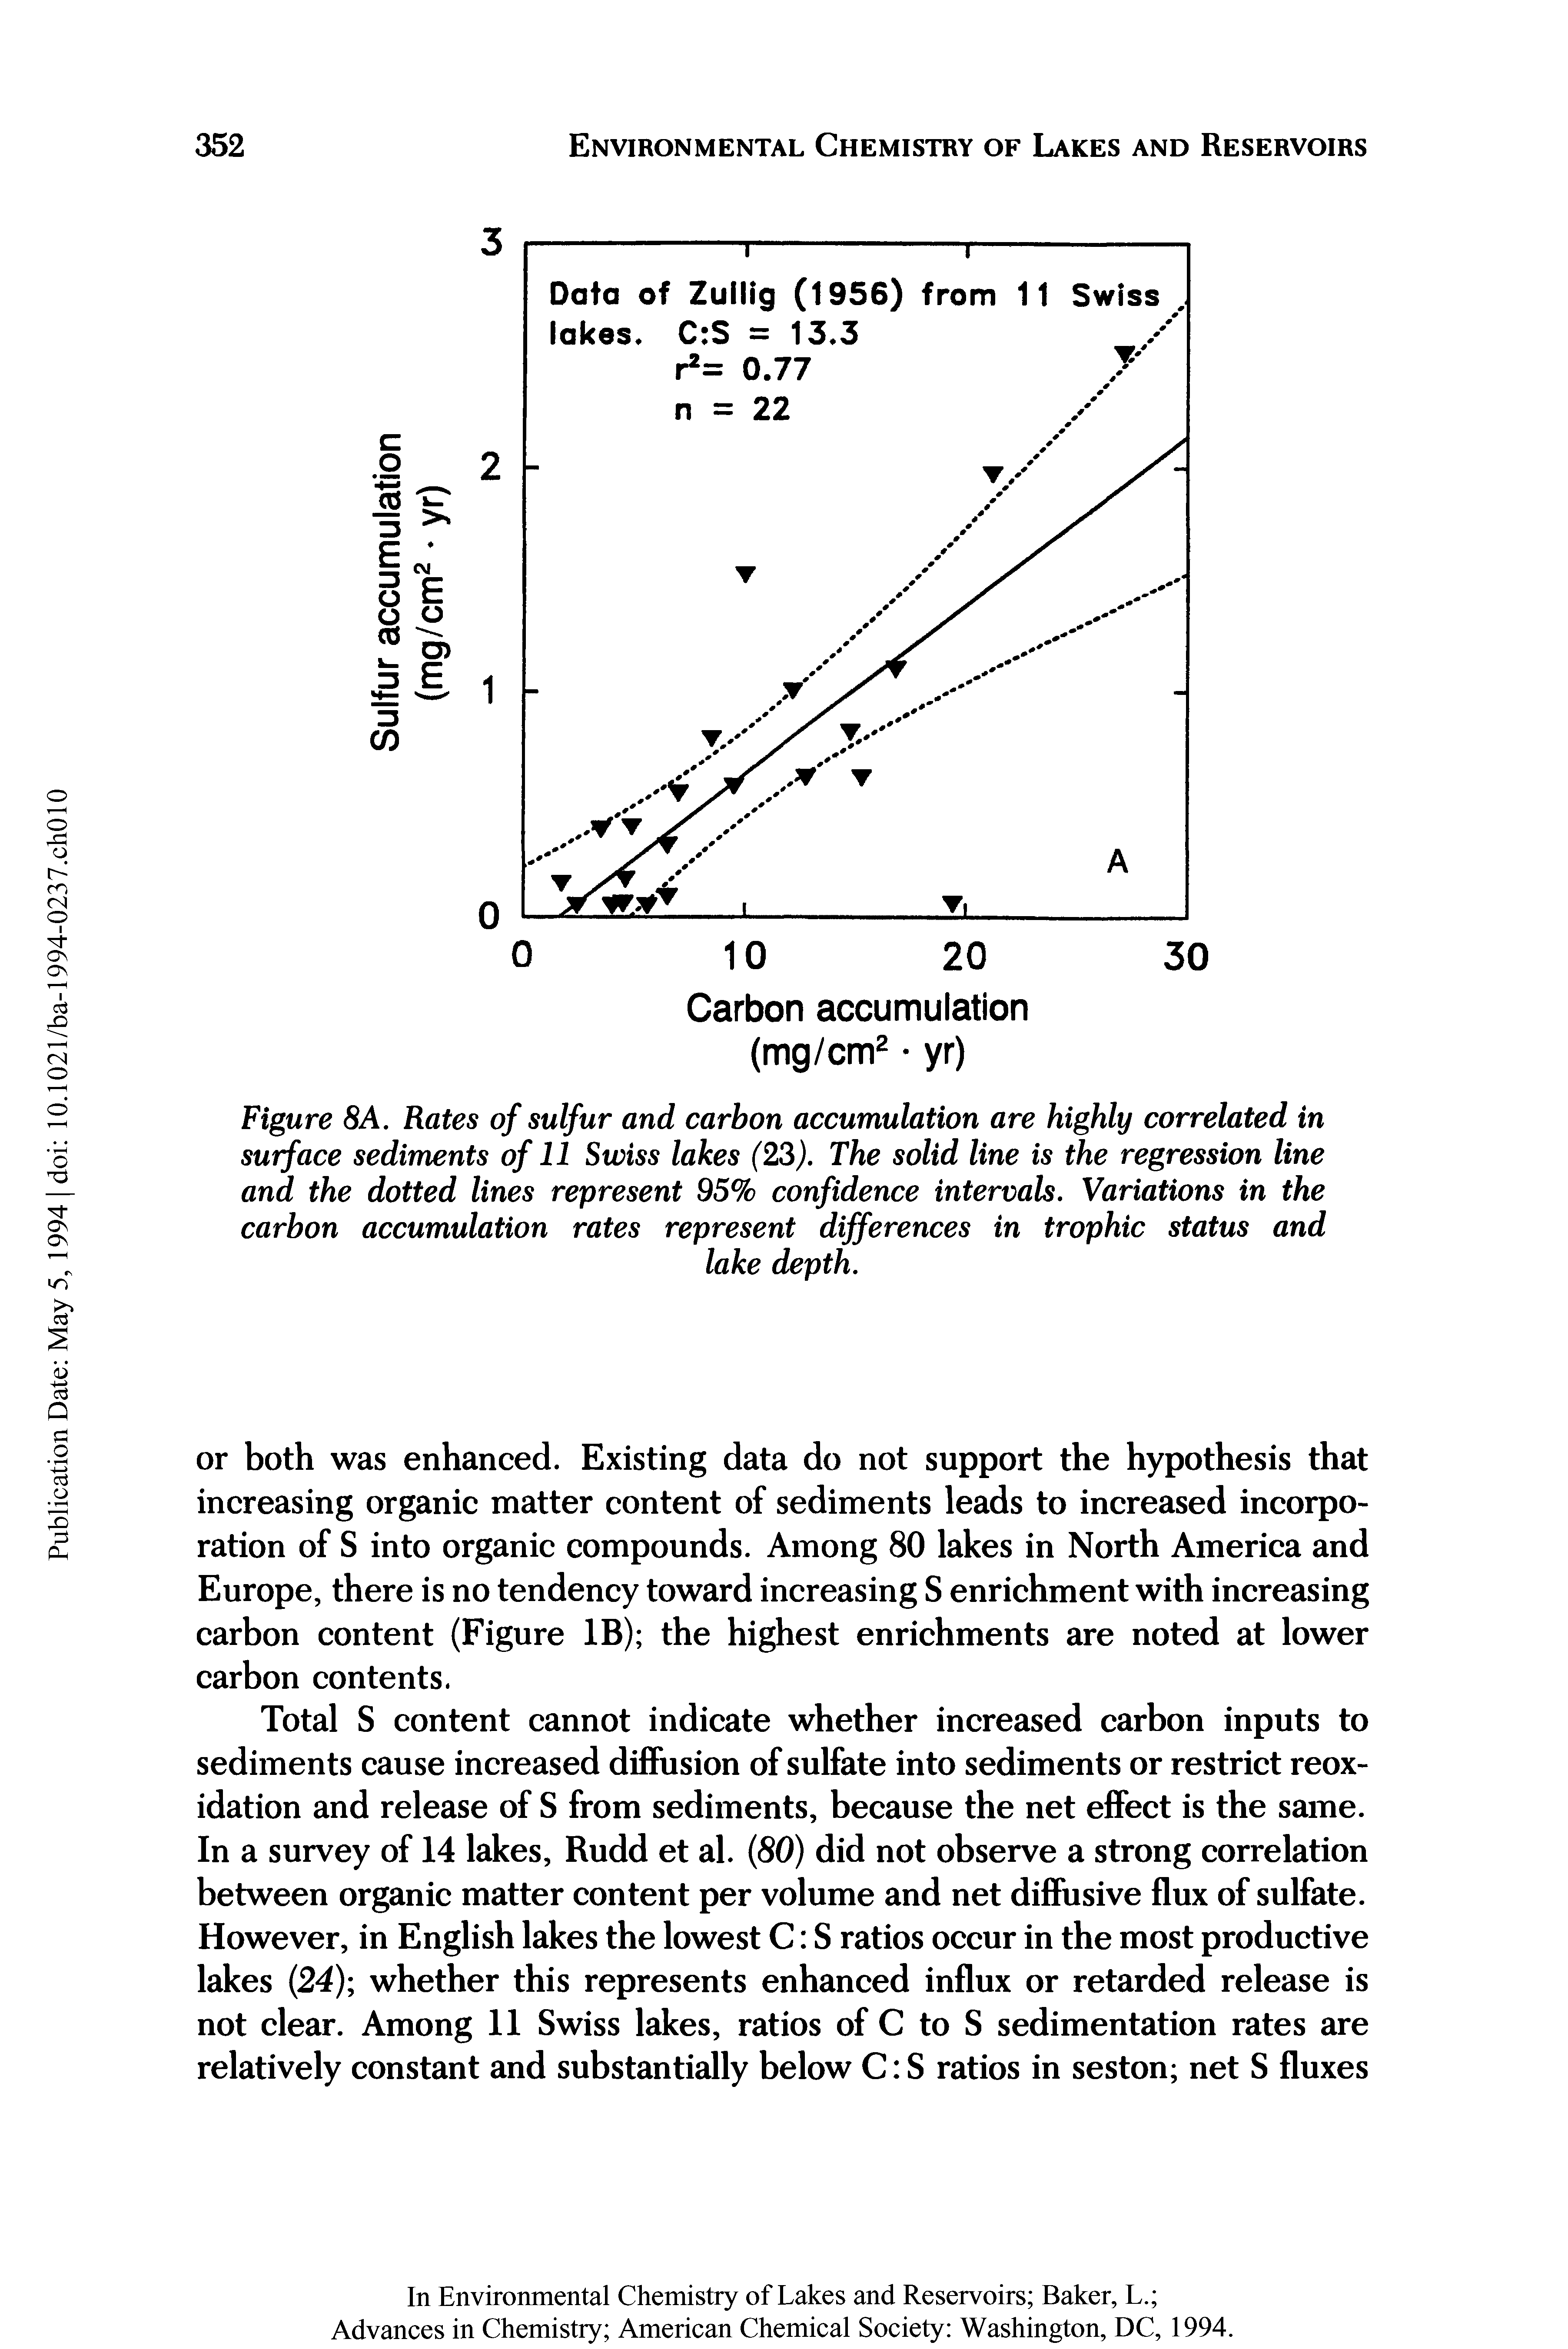 Figure 8A. Rates of sulfur and carbon accumulation are highly correlated in surface sediments of 11 Swiss lakes (23). The solid line is the regression line and the dotted lines represent 95% confidence intervals. Variations in the carbon accumulation rates represent differences in trophic status and...